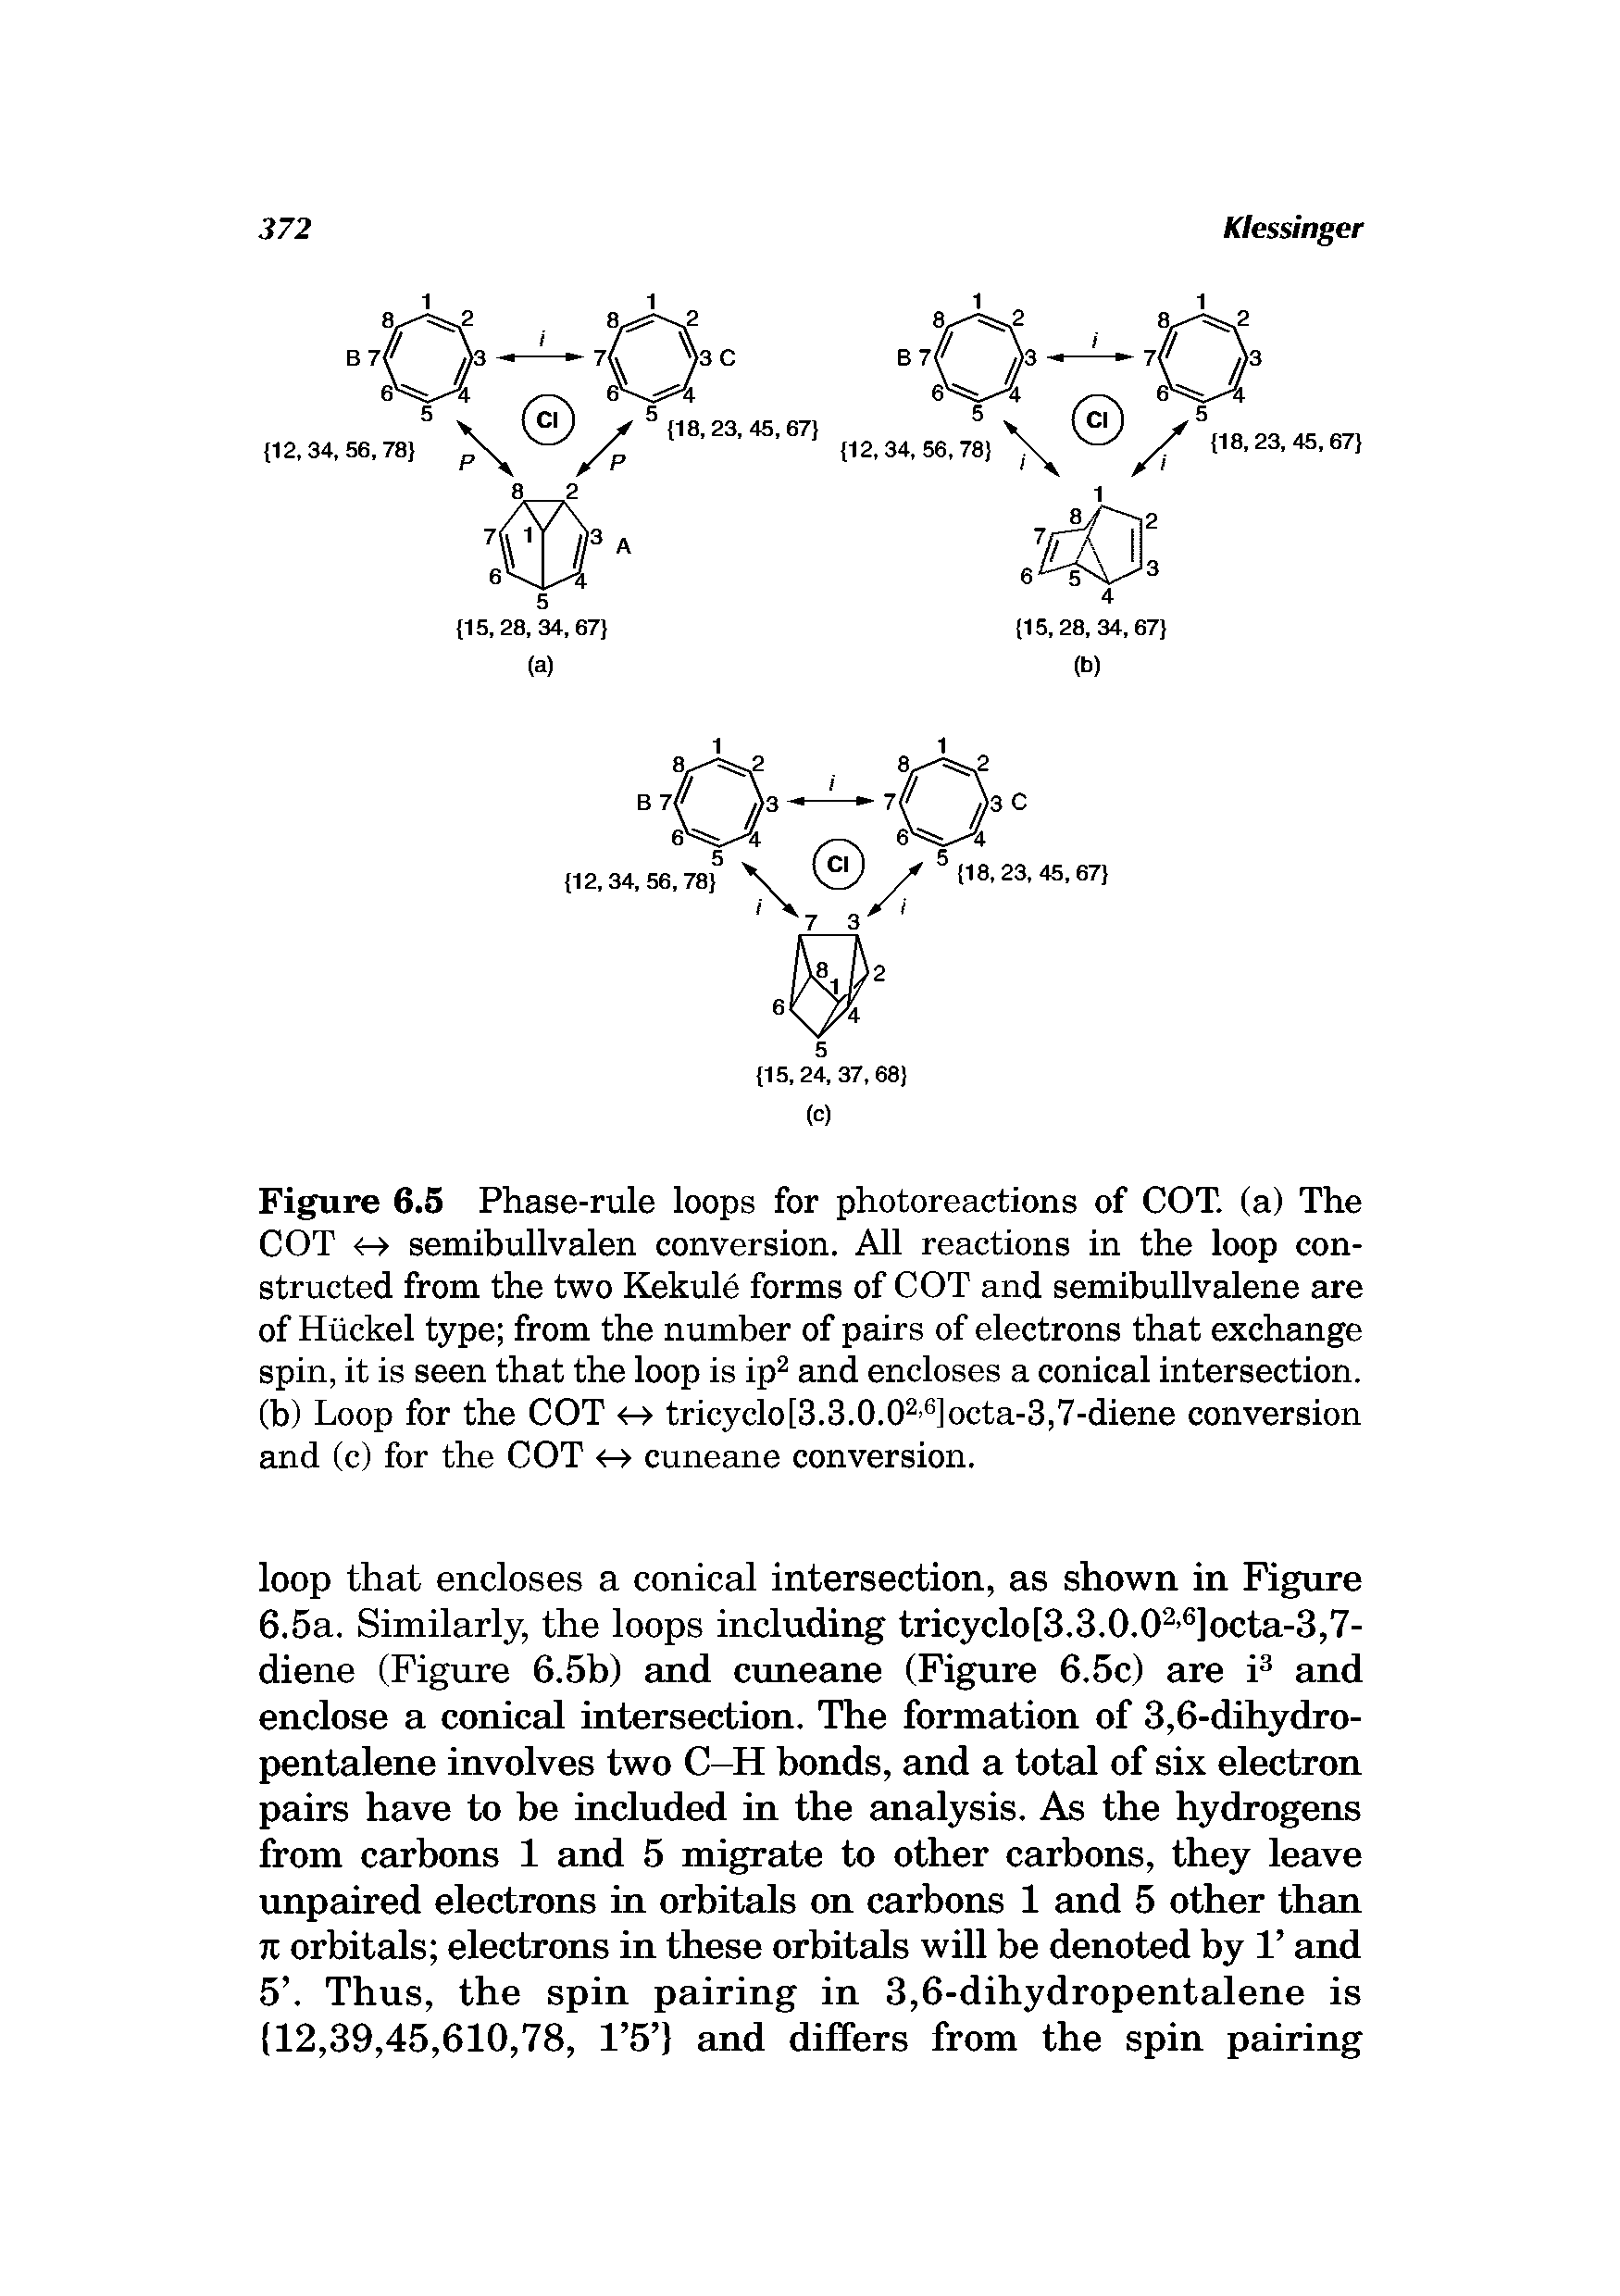 Figure 6.5 Phase-rule loops for photoreactions of COT. (a) The COT o semibullvalen conversion. All reactions in the loop constructed from the two Kekule forms of COT and semibullvalene are of Htickel type from the number of pairs of electrons that exchange spin, it is seen that the loop is ip and encloses a conical intersection, (b) Loop for the COT tricyclo[3.3.0.0 ]octa-3,7-diene conversion...